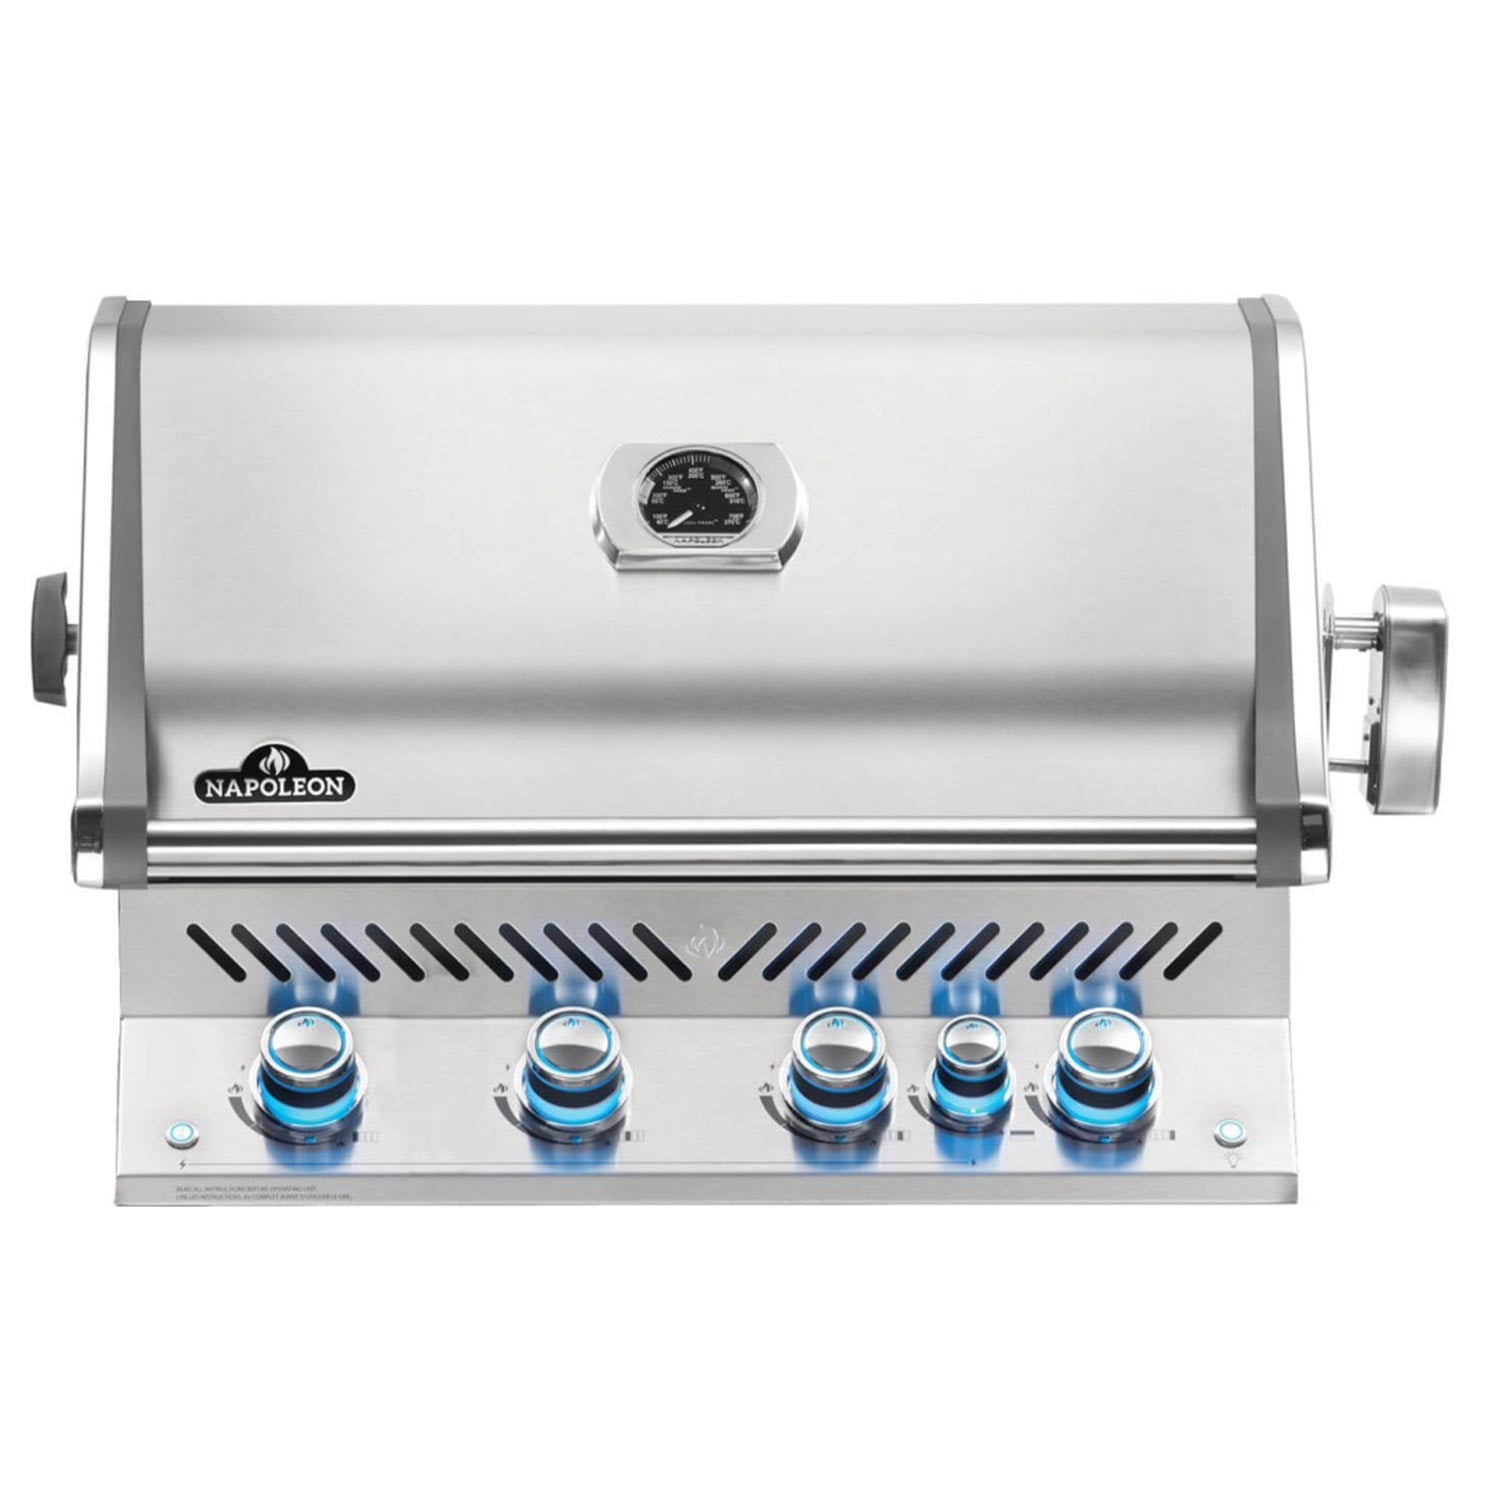 Napoleon Built-In Prestige PRO 500 Propane Gas Grill (Stainless Steel) BIPRO500RBPSS-3